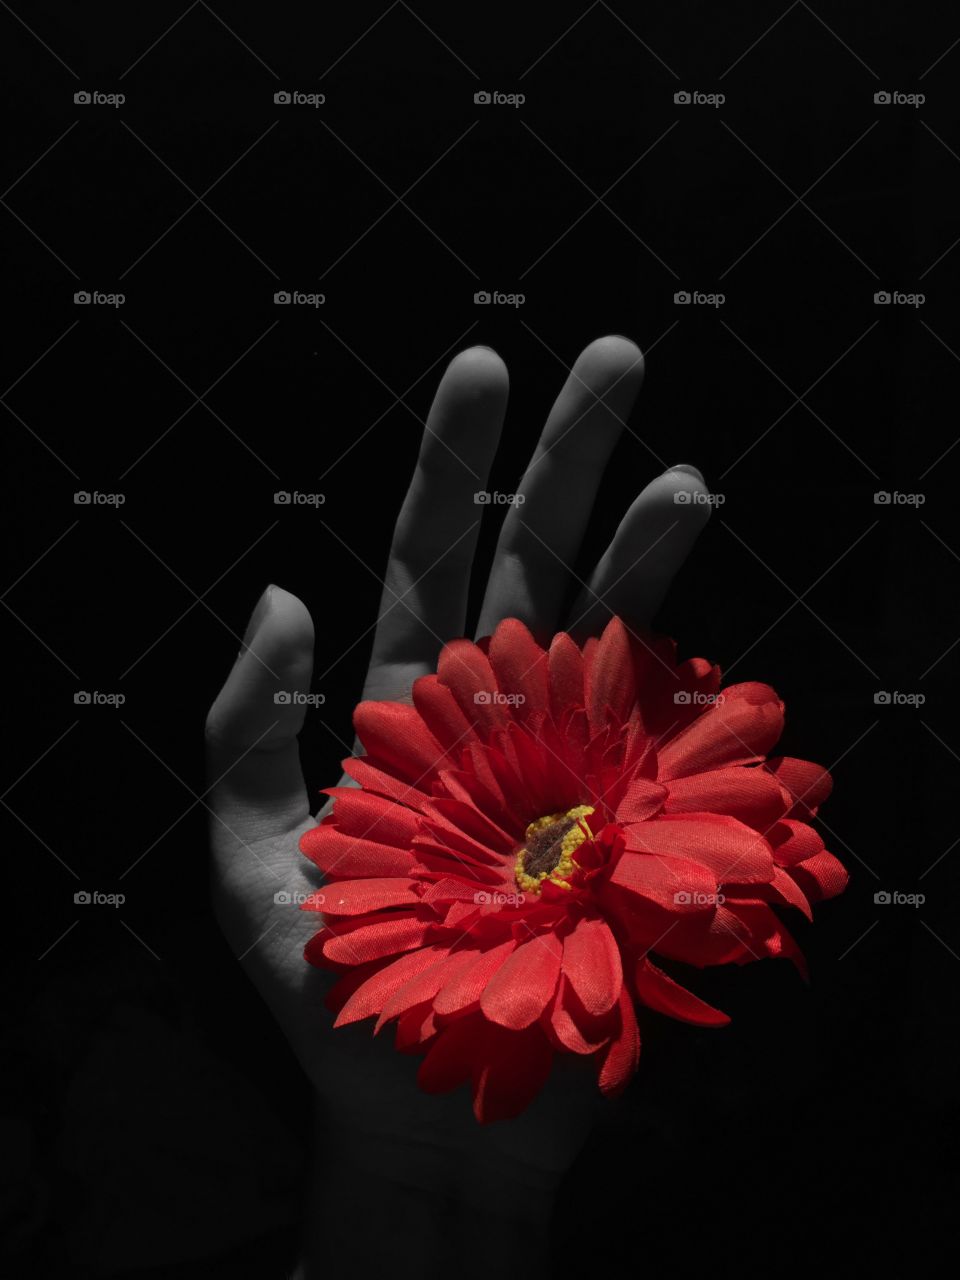 Gerbera flower. Coloursplash with black and white background.